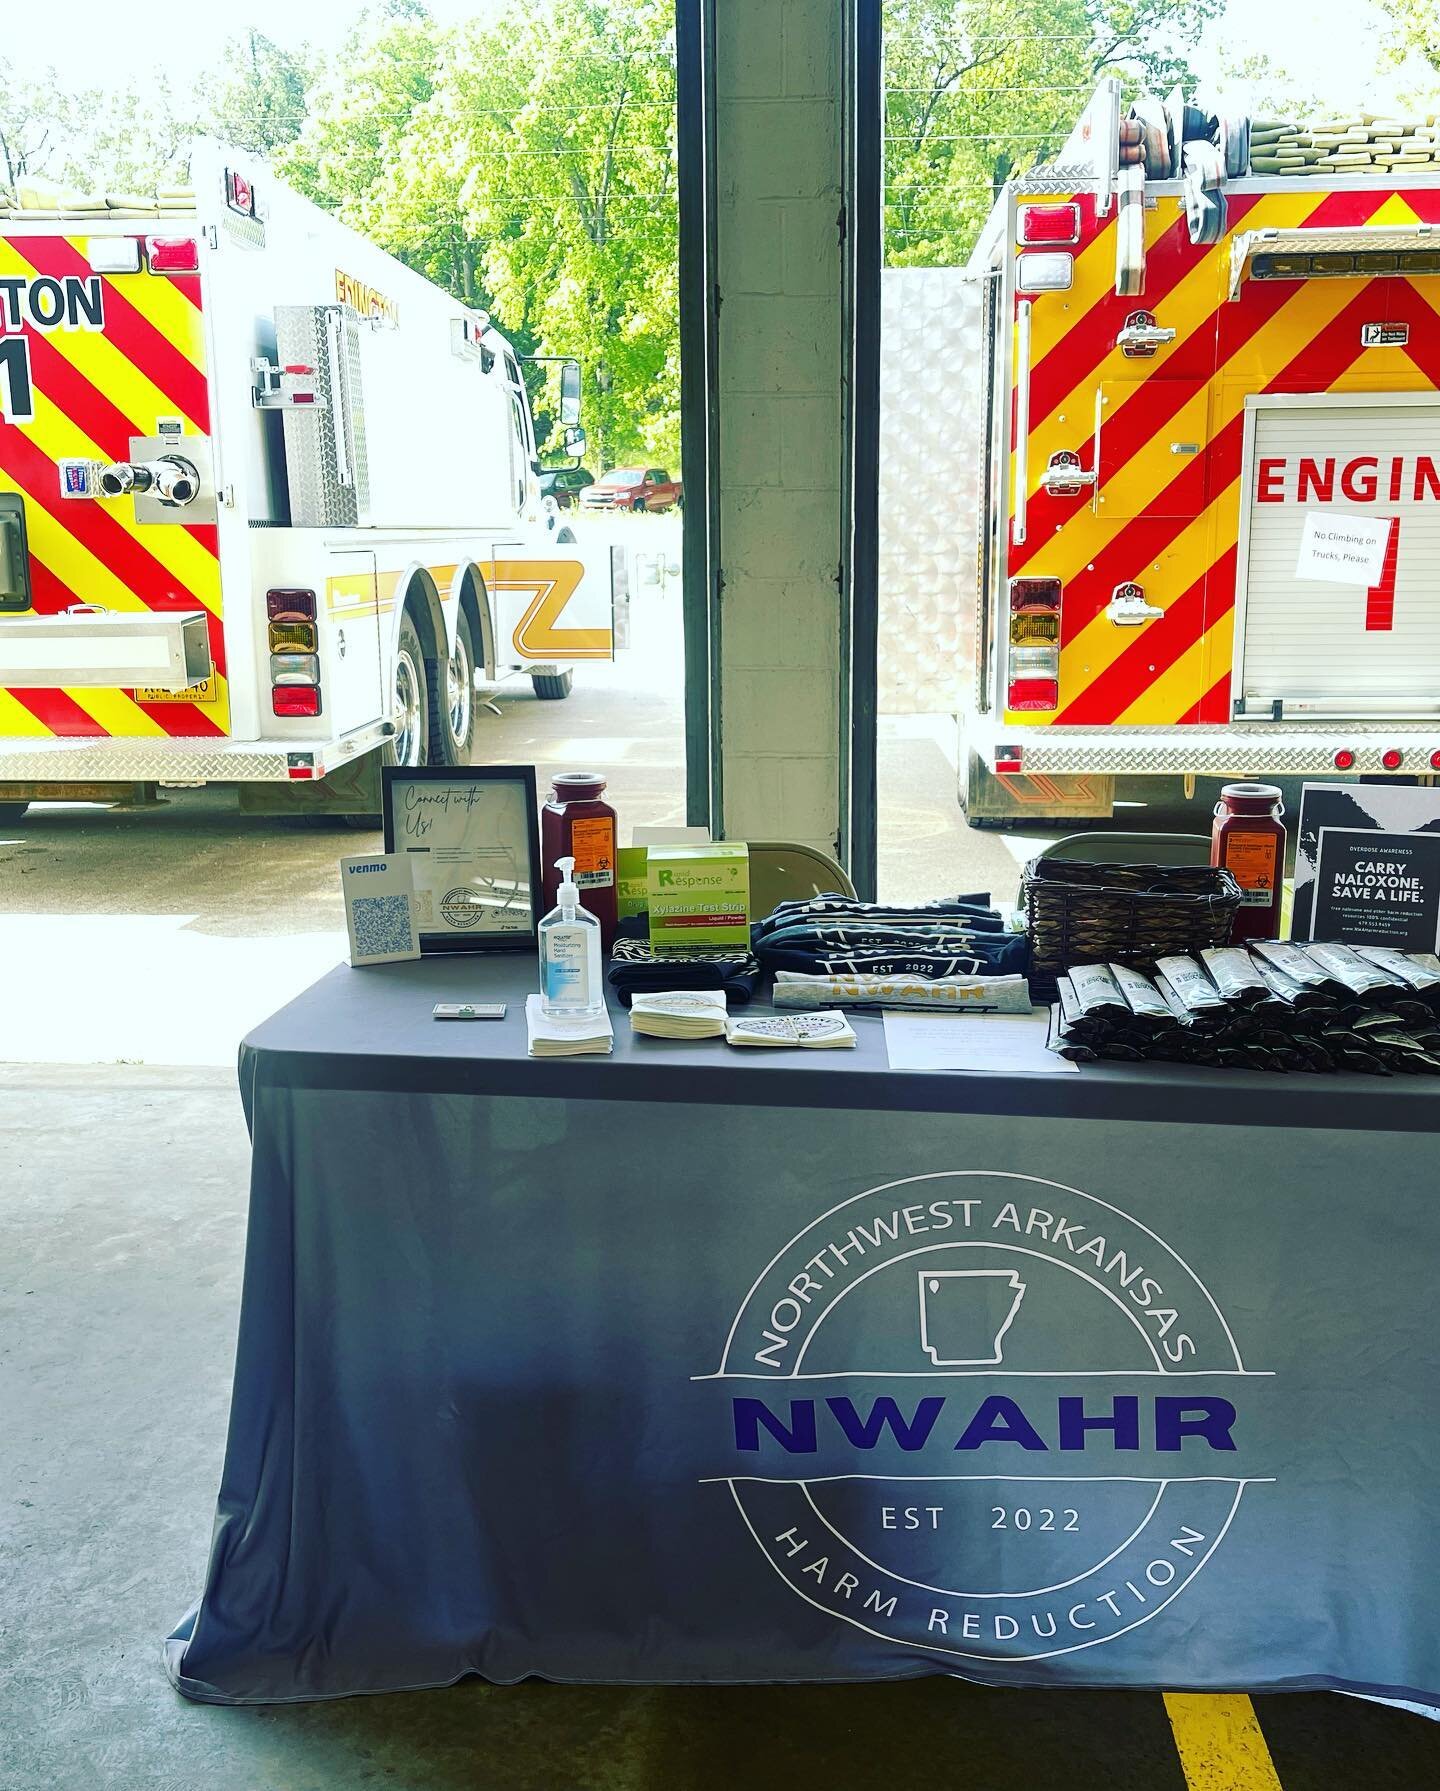 How fun was today?! We love getting to work with first responders in our area. These connections are vital to our people. If they know who we are, they have another resource to provide to the people they and we are serving. We can work better togethe